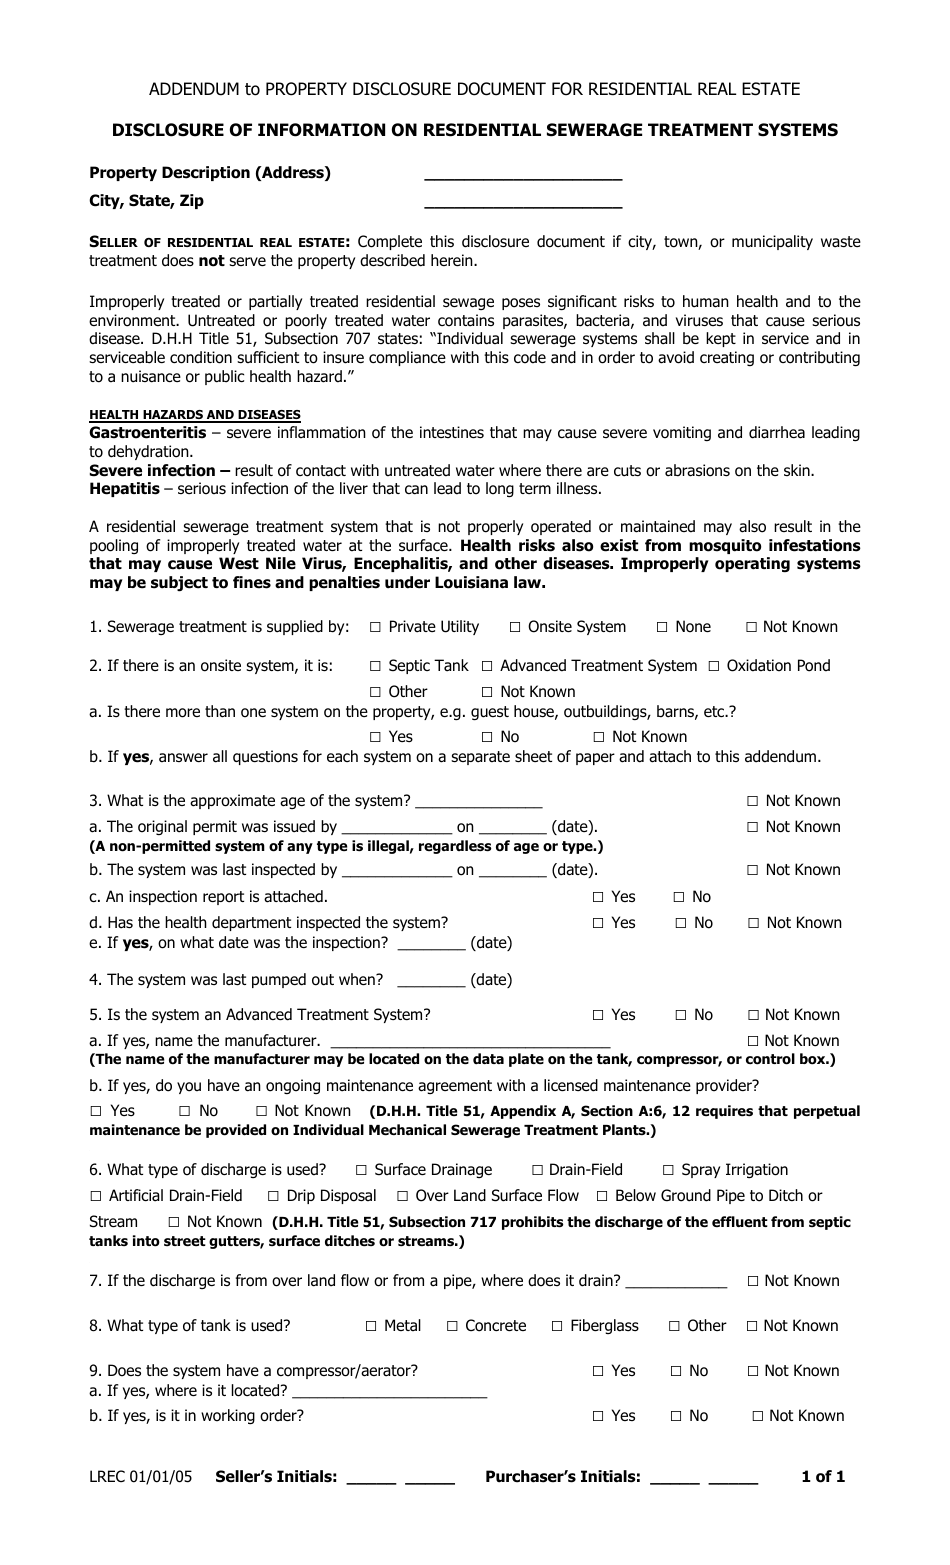 Addendum to Property Disclosure Document for Residential Real Estate - Disclosure of Information on Residential Sewerage Treatment Systems - Louisiana, Page 1